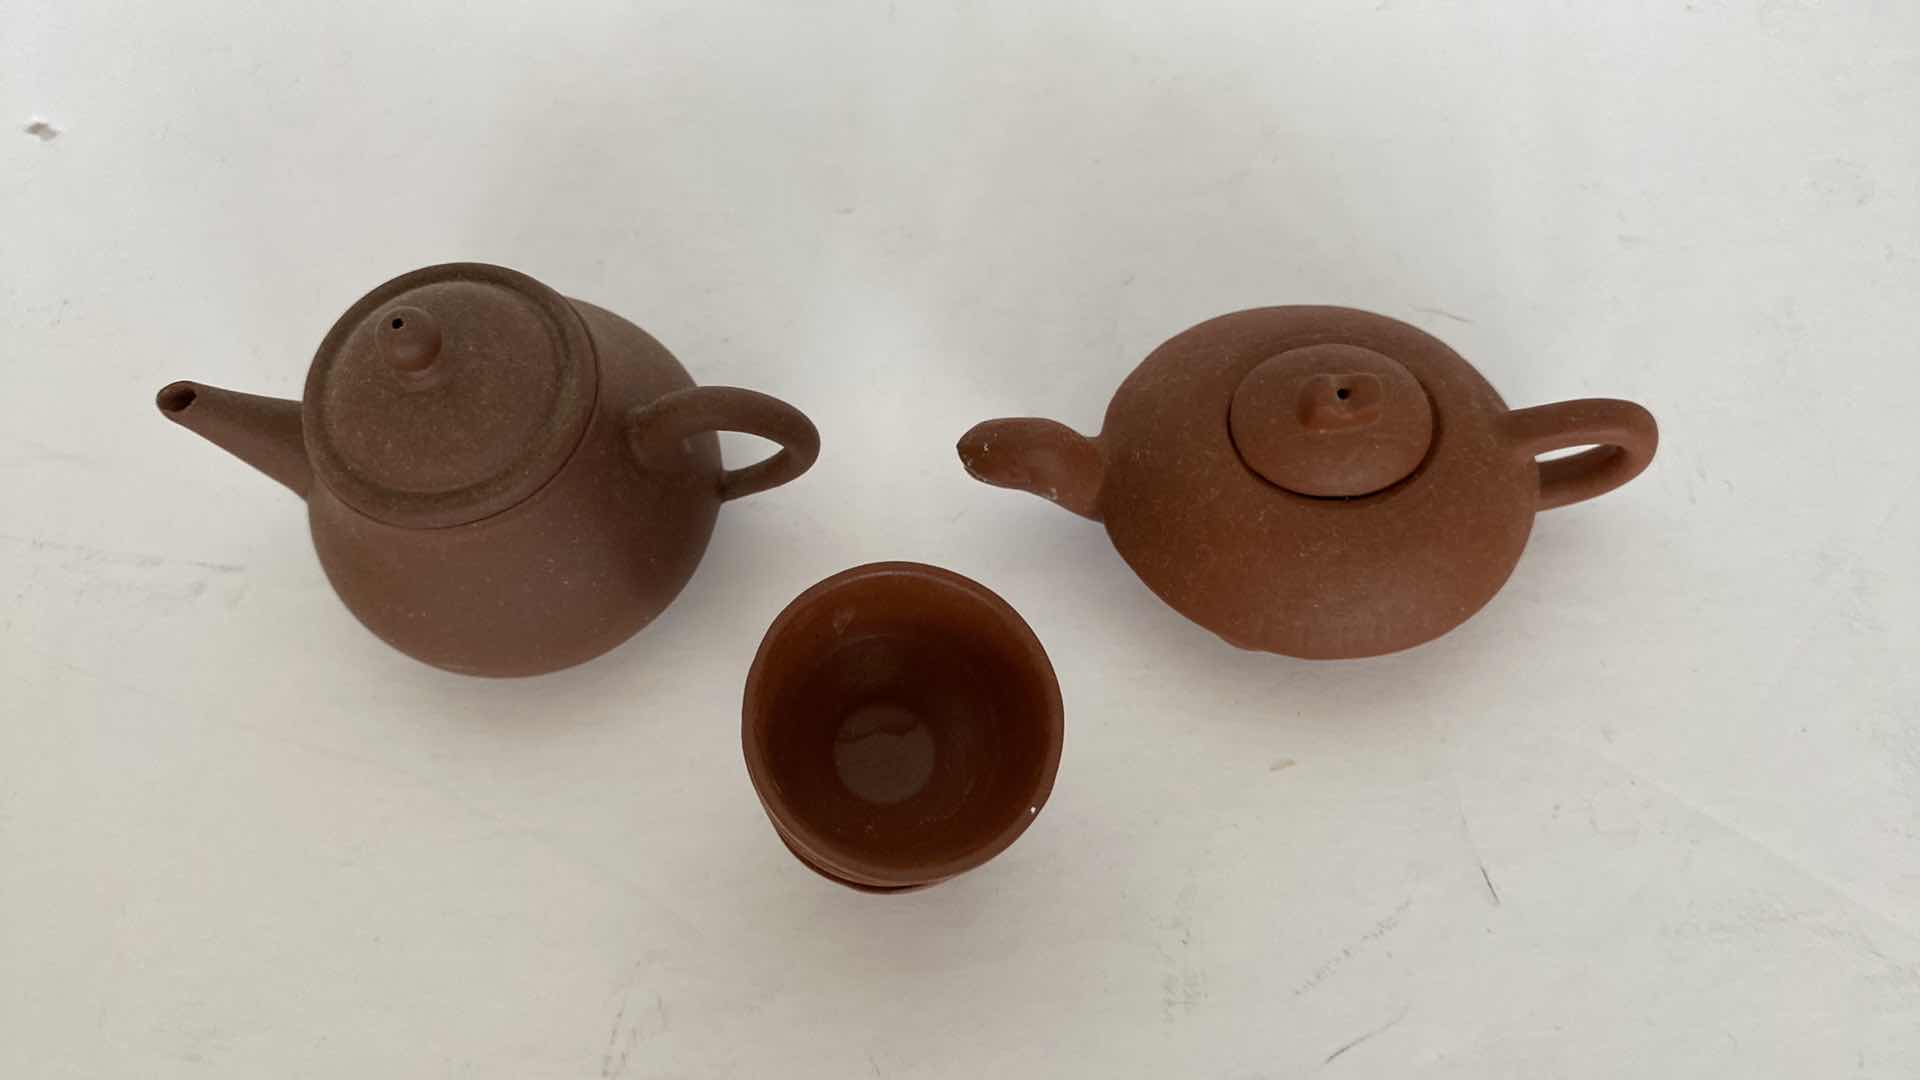 Photo 2 of PAIR OF VINTAGE CHINESE COLLECTIBLE CLAY TEA POTS WITH 4 TEA CUPS LARGEST TEAPOT 4” x 1 1/2”